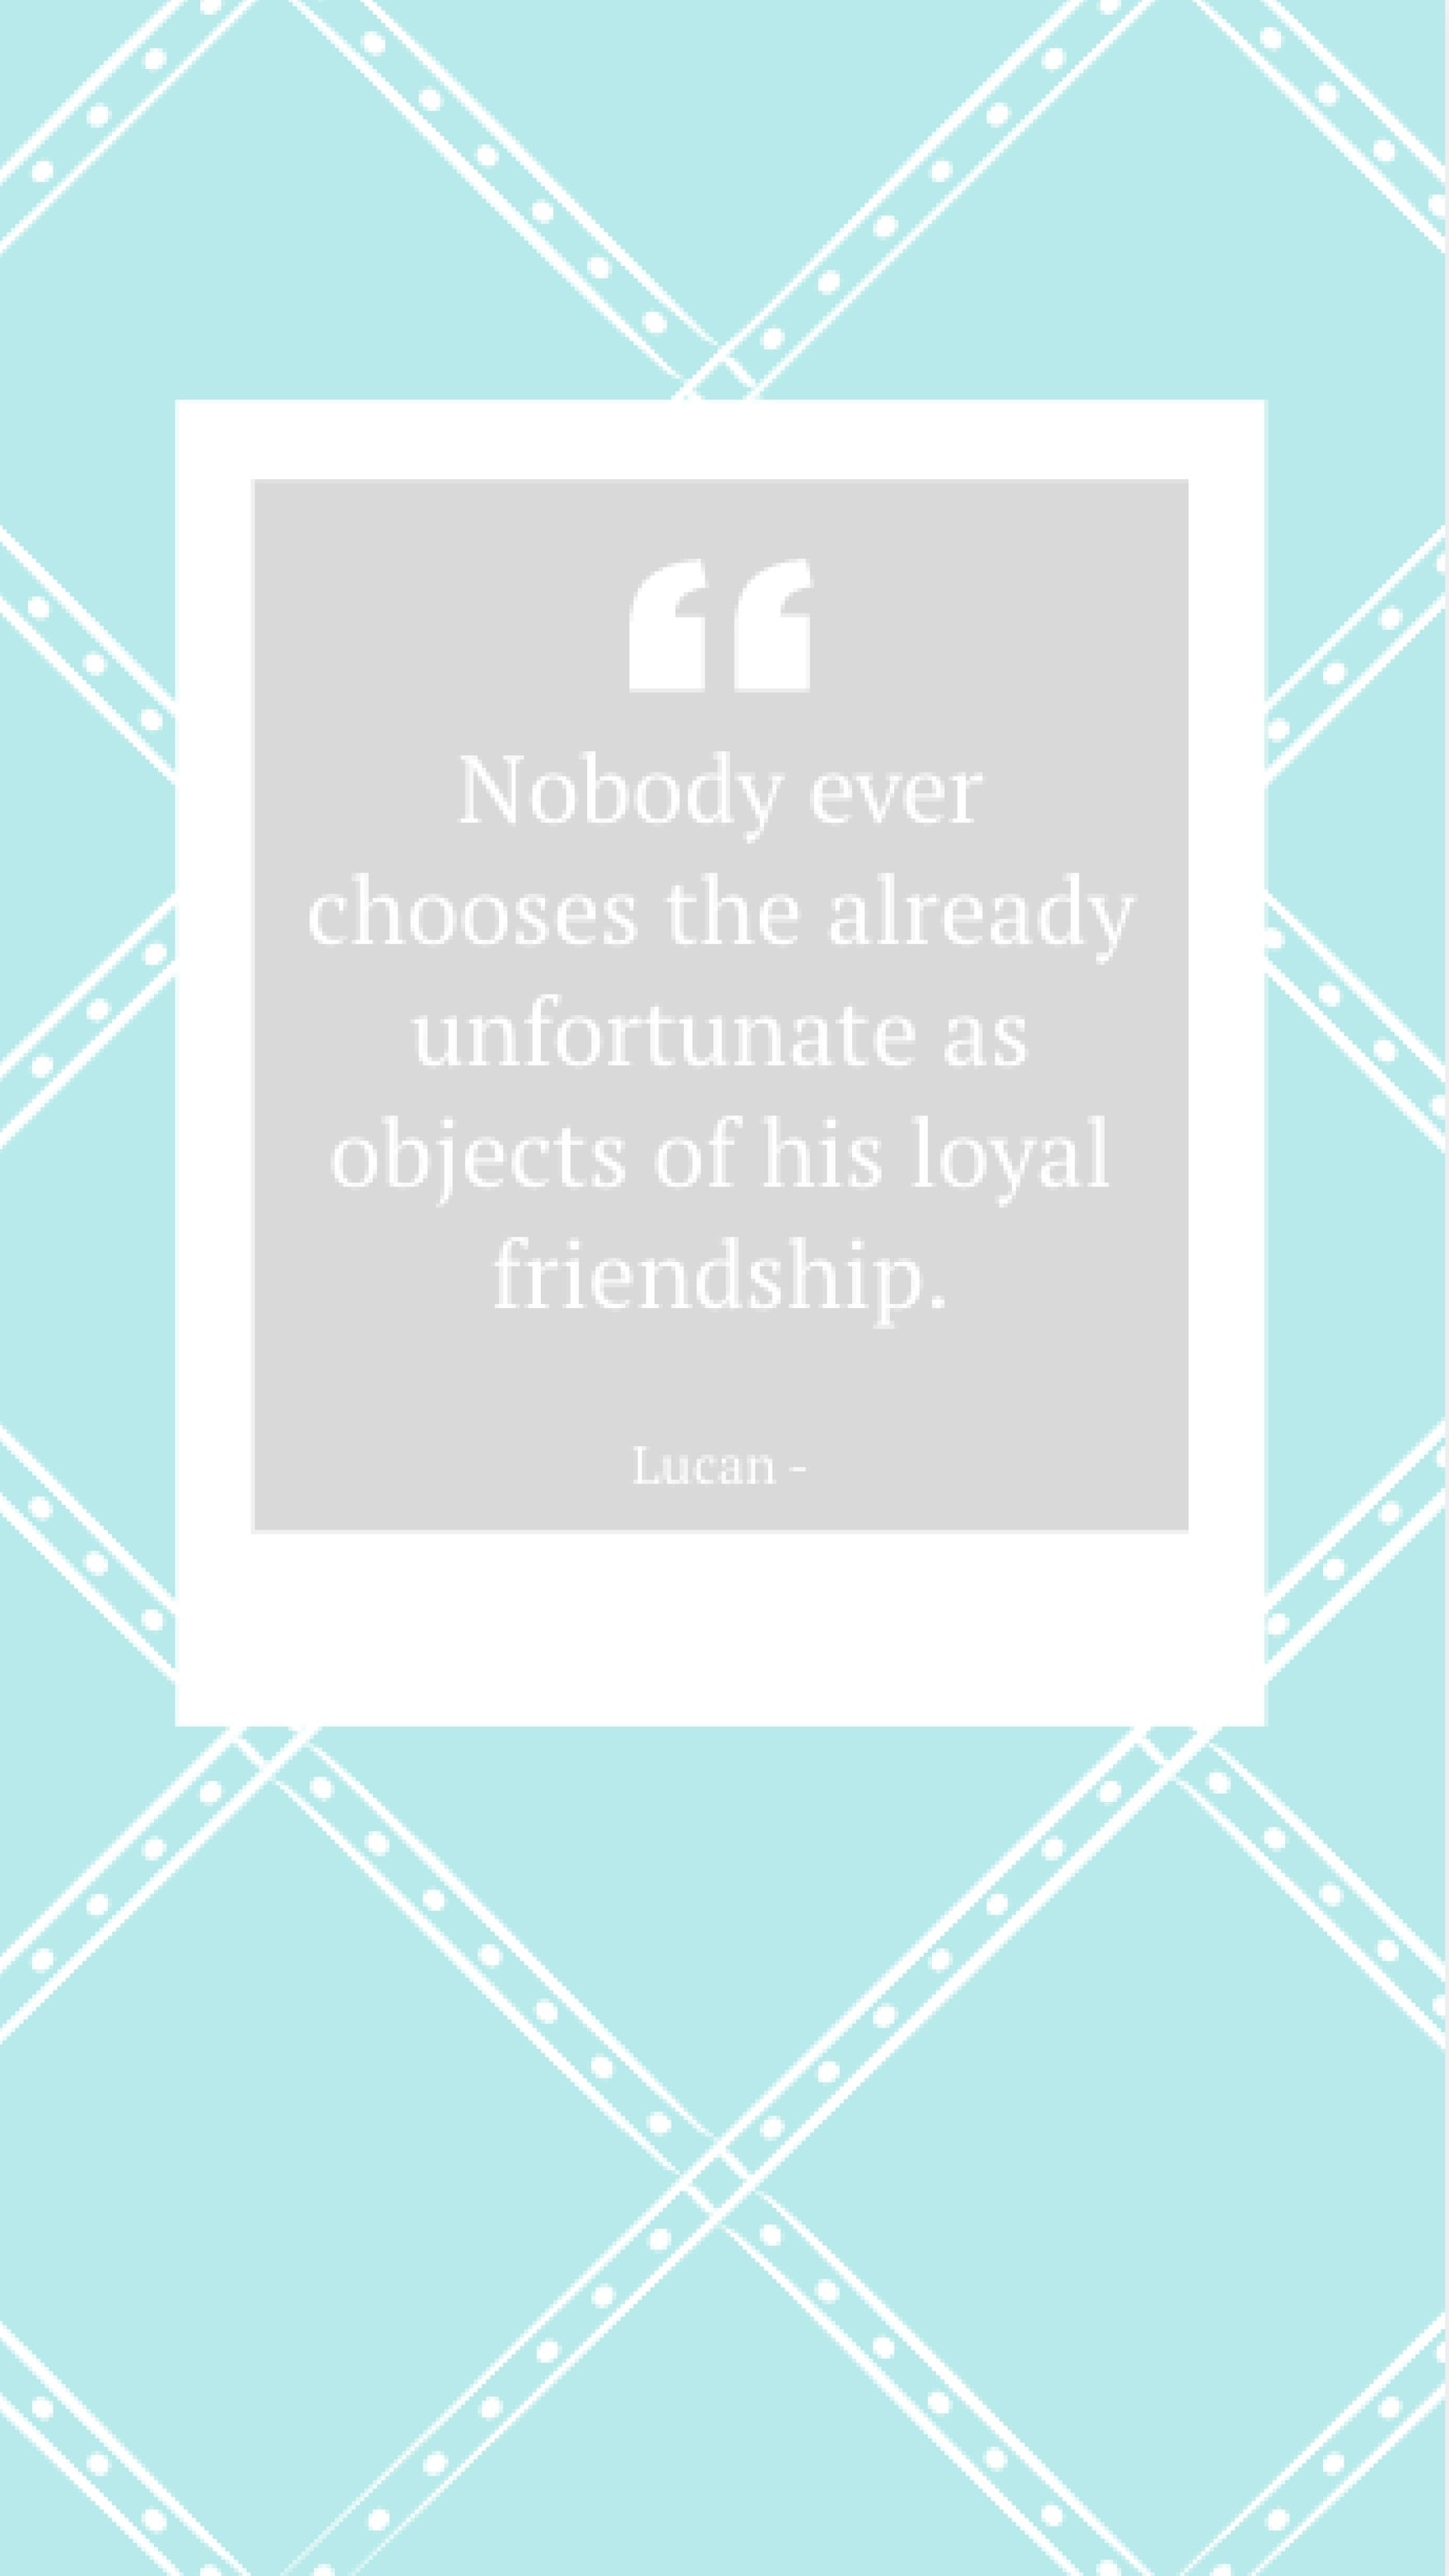 Lucan - Nobody ever chooses the already unfortunate as objects of his loyal friendship. Template